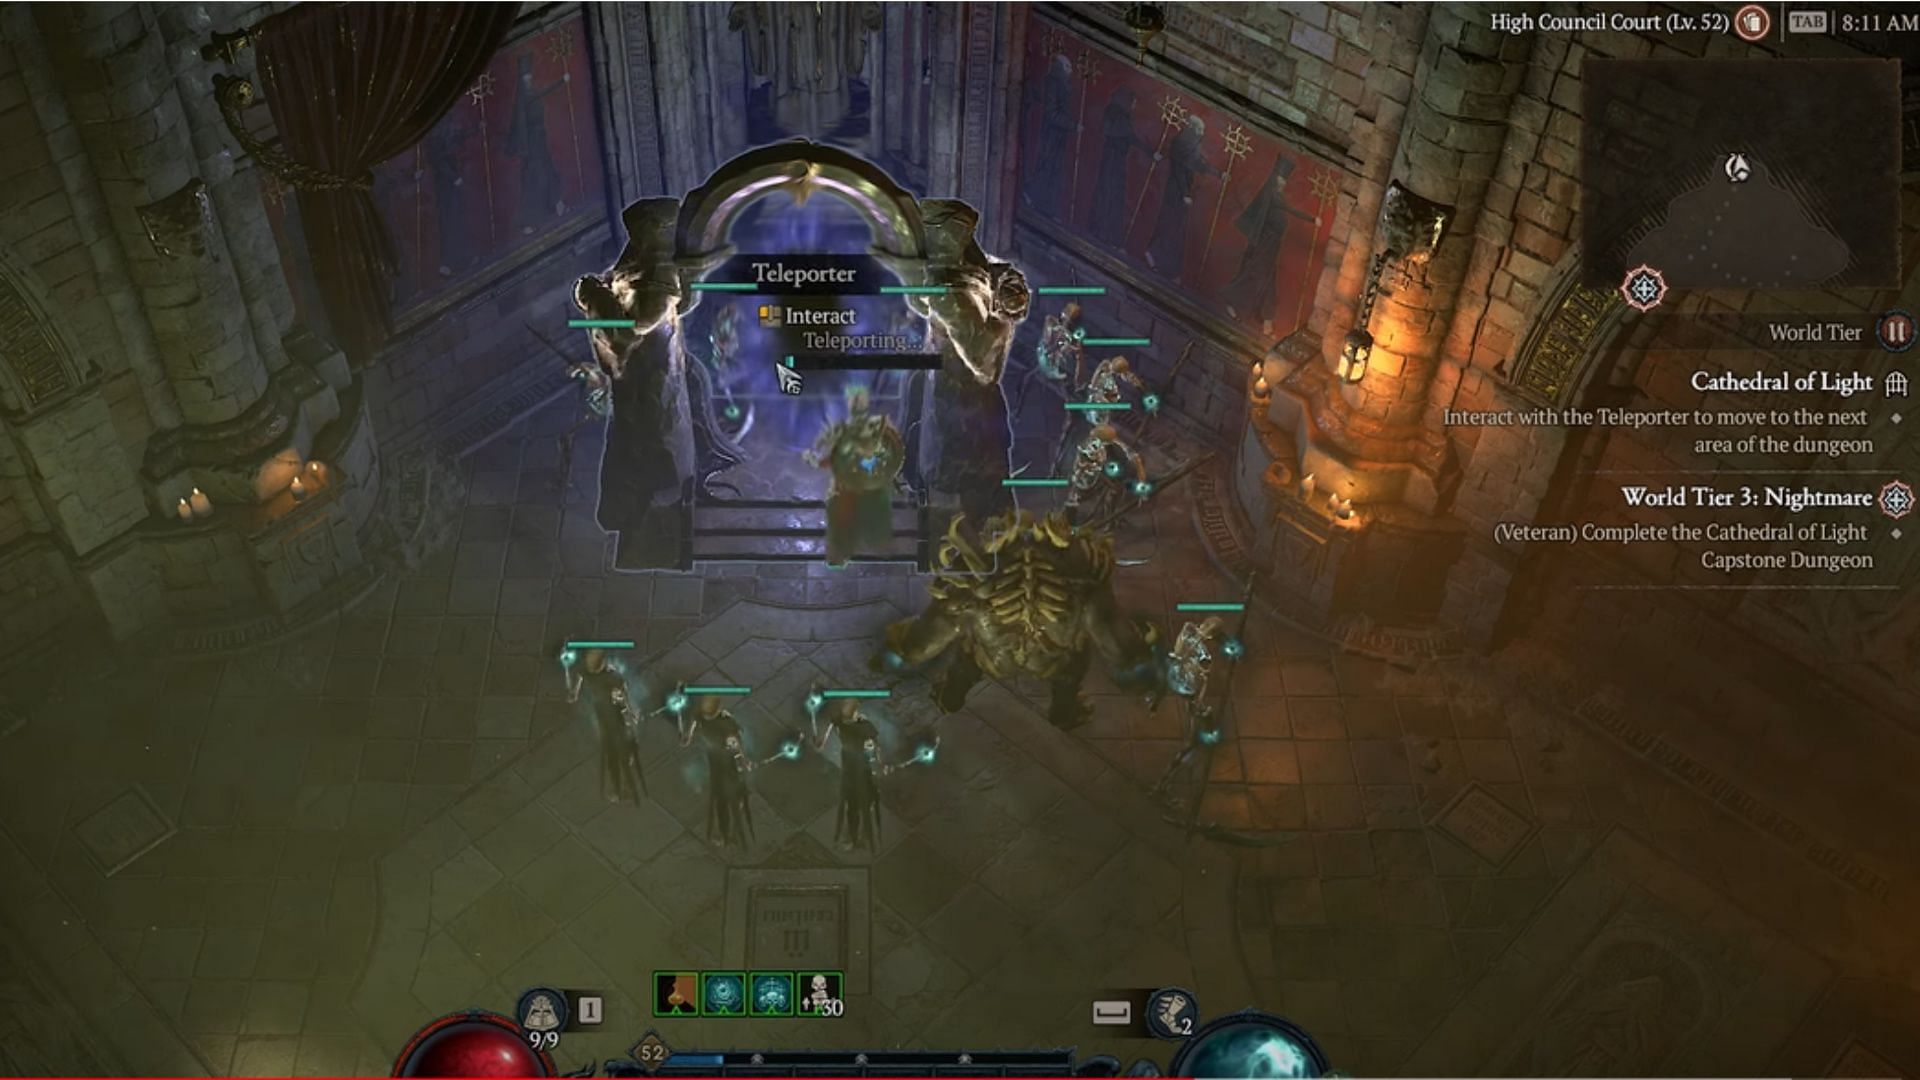 Your next task will be to interact with the Teleporter (Image via Blizzard Entertainment)